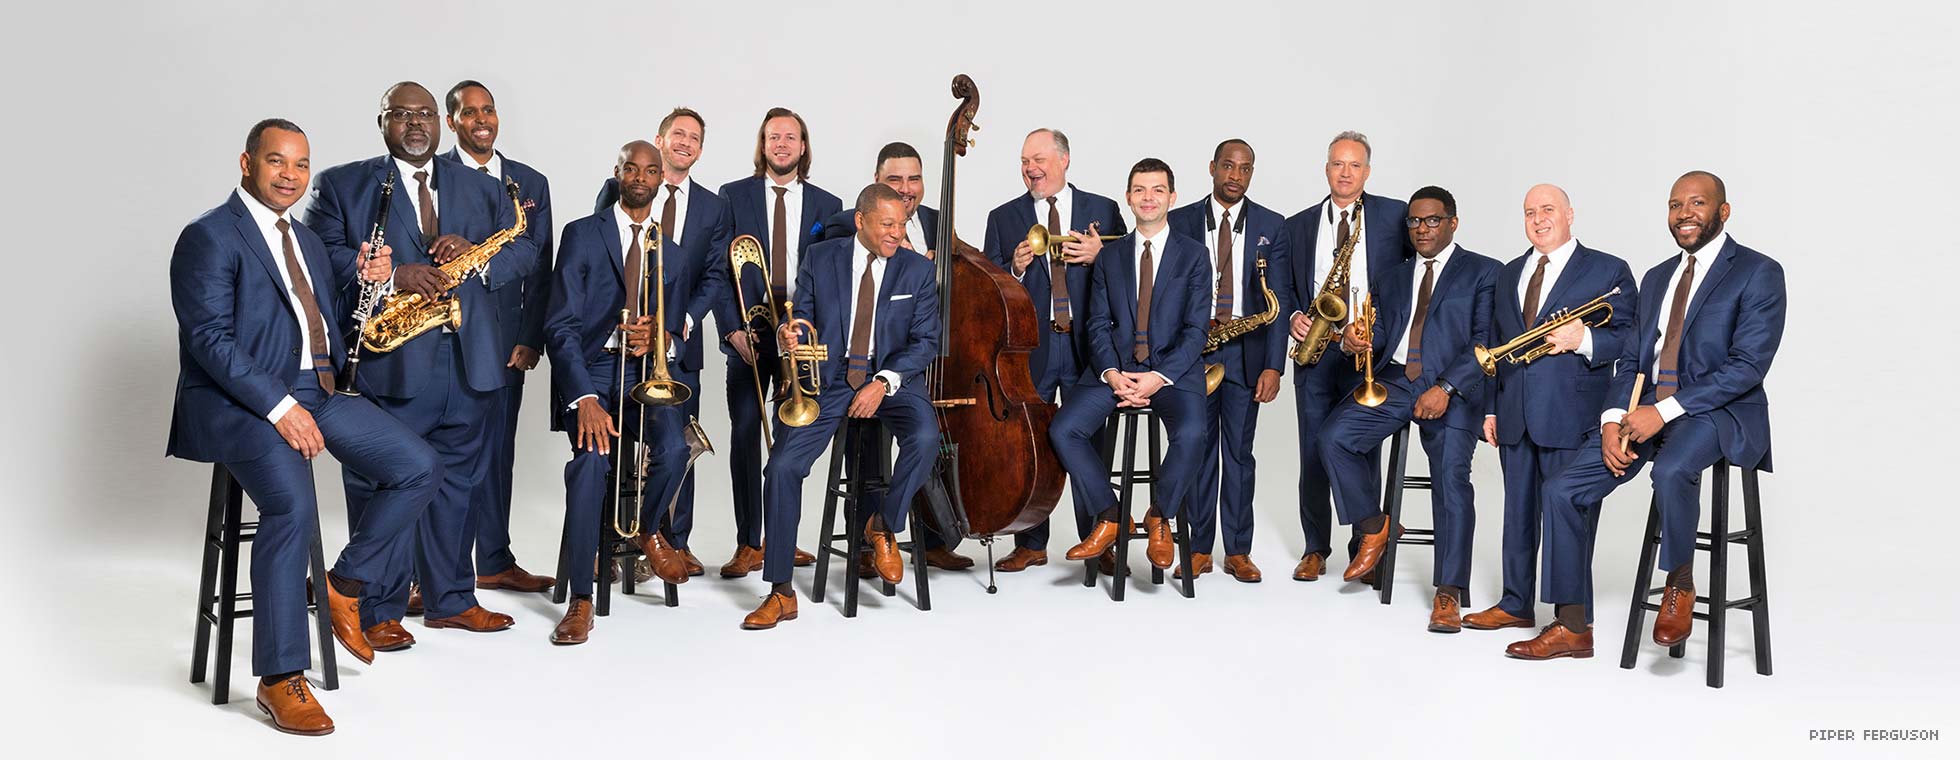 Fifteen jazz musicians stand in a row, wearing suits and holding their instruments, as they laugh and smile.